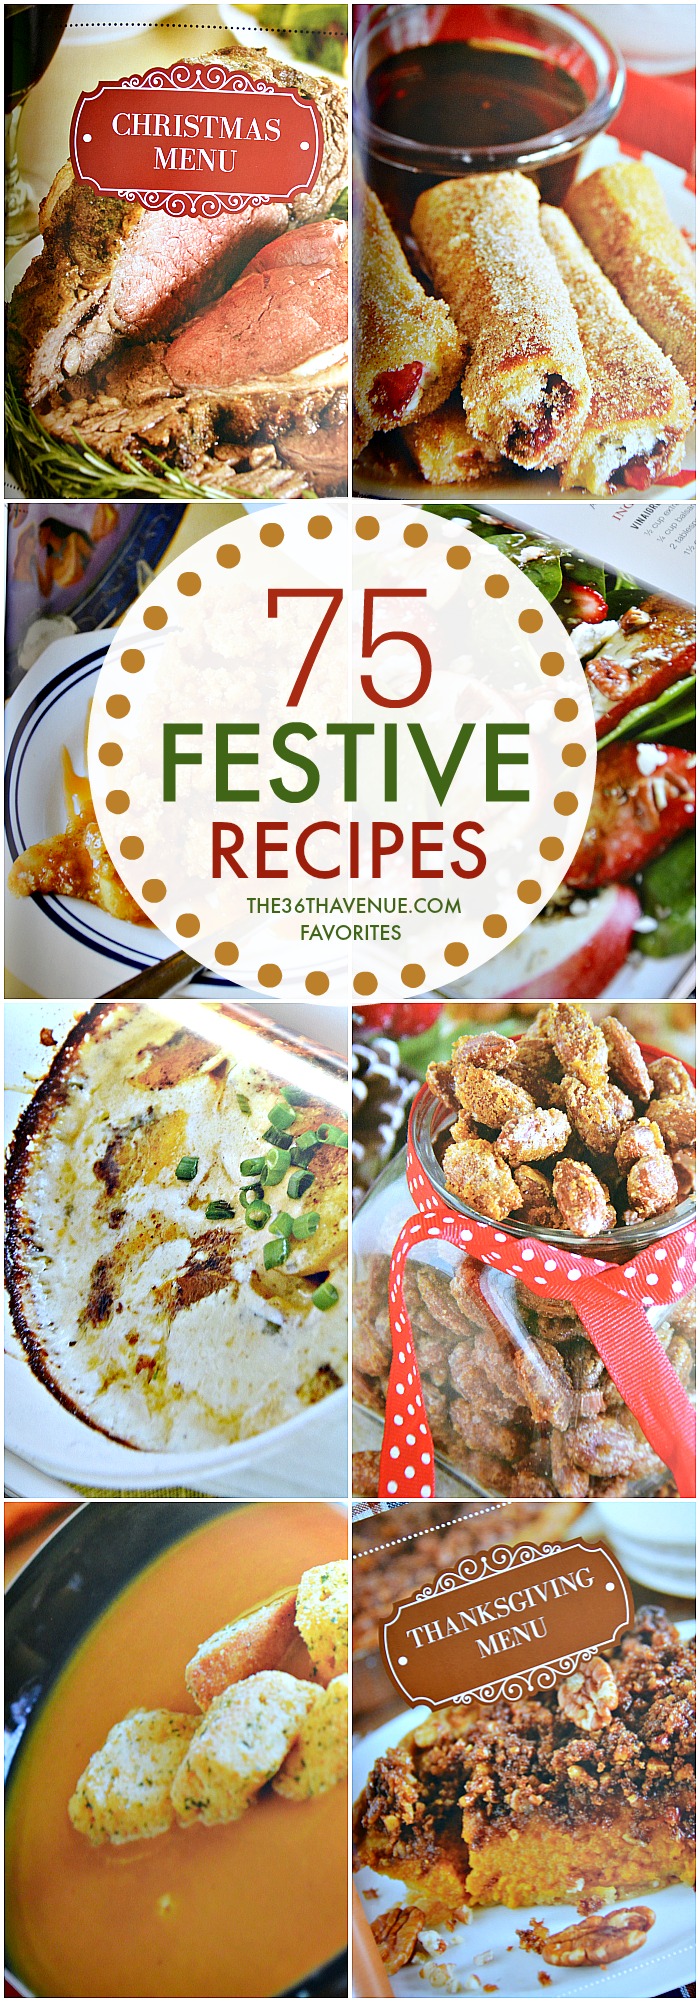 75 Festive Delicious Holiday Recipes that your entire family will love. Easy meal ideas from Halloween to Christmas!